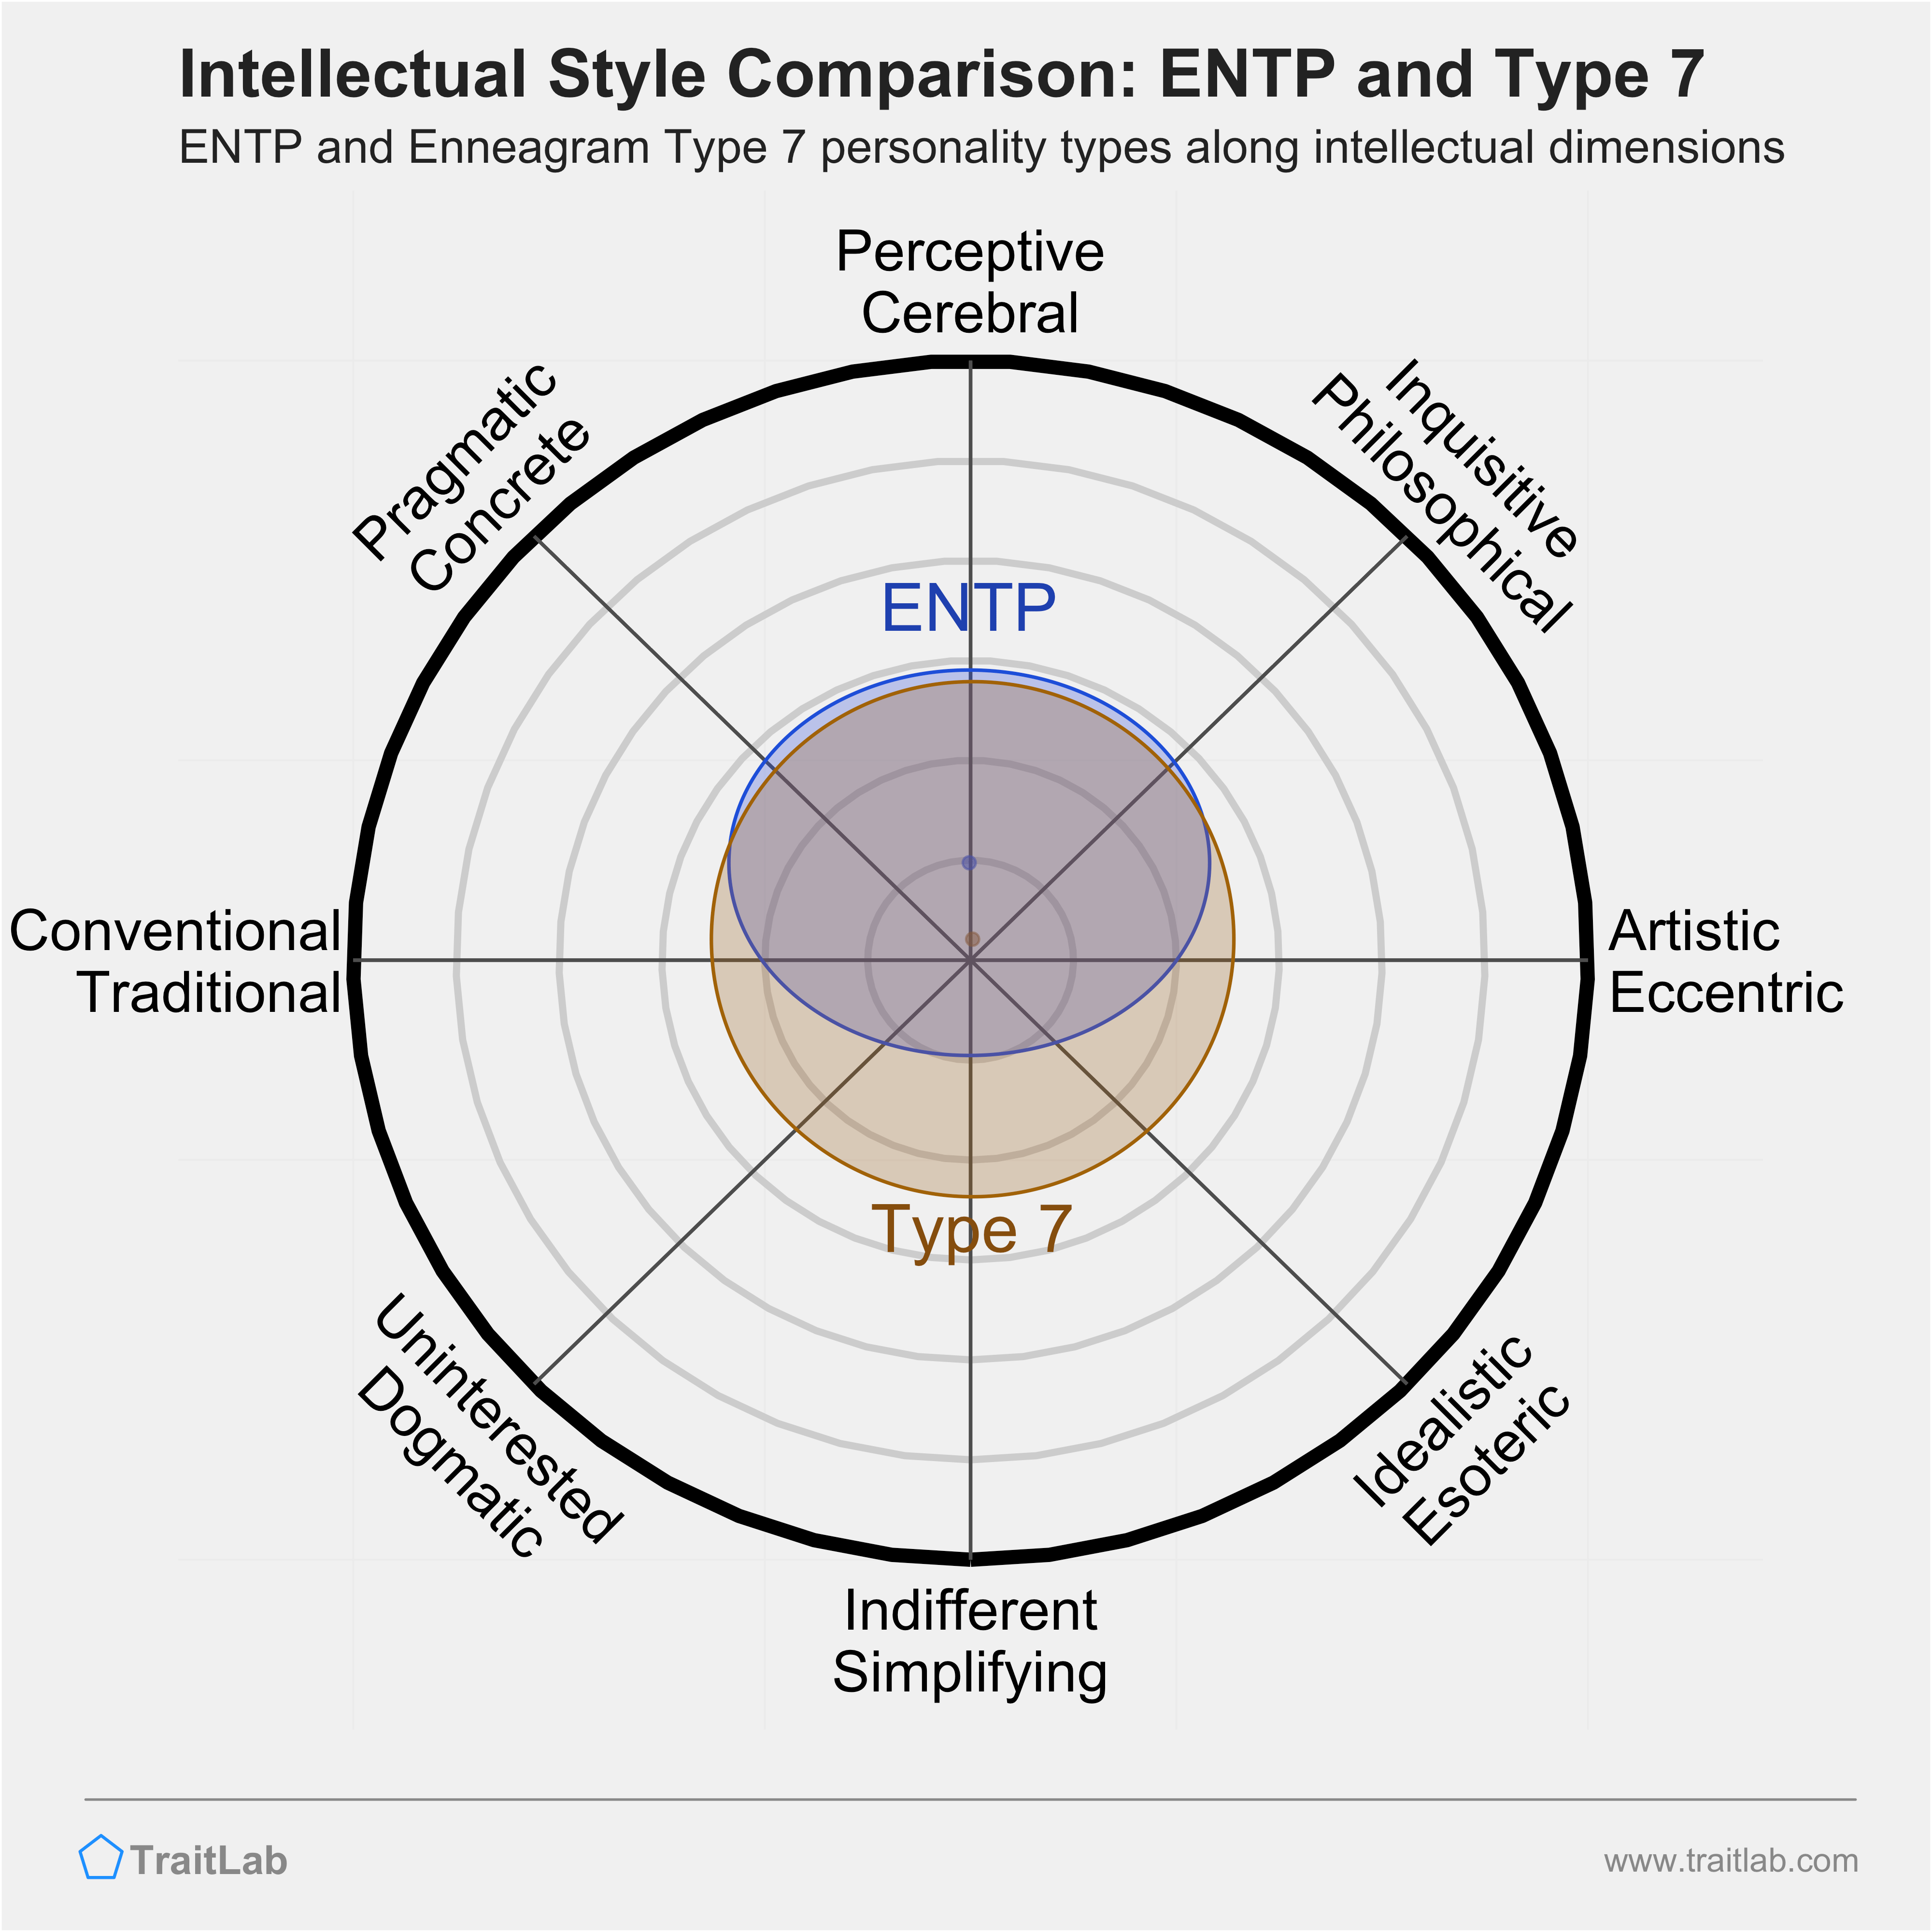 ENTP and Type 7 comparison across intellectual dimensions